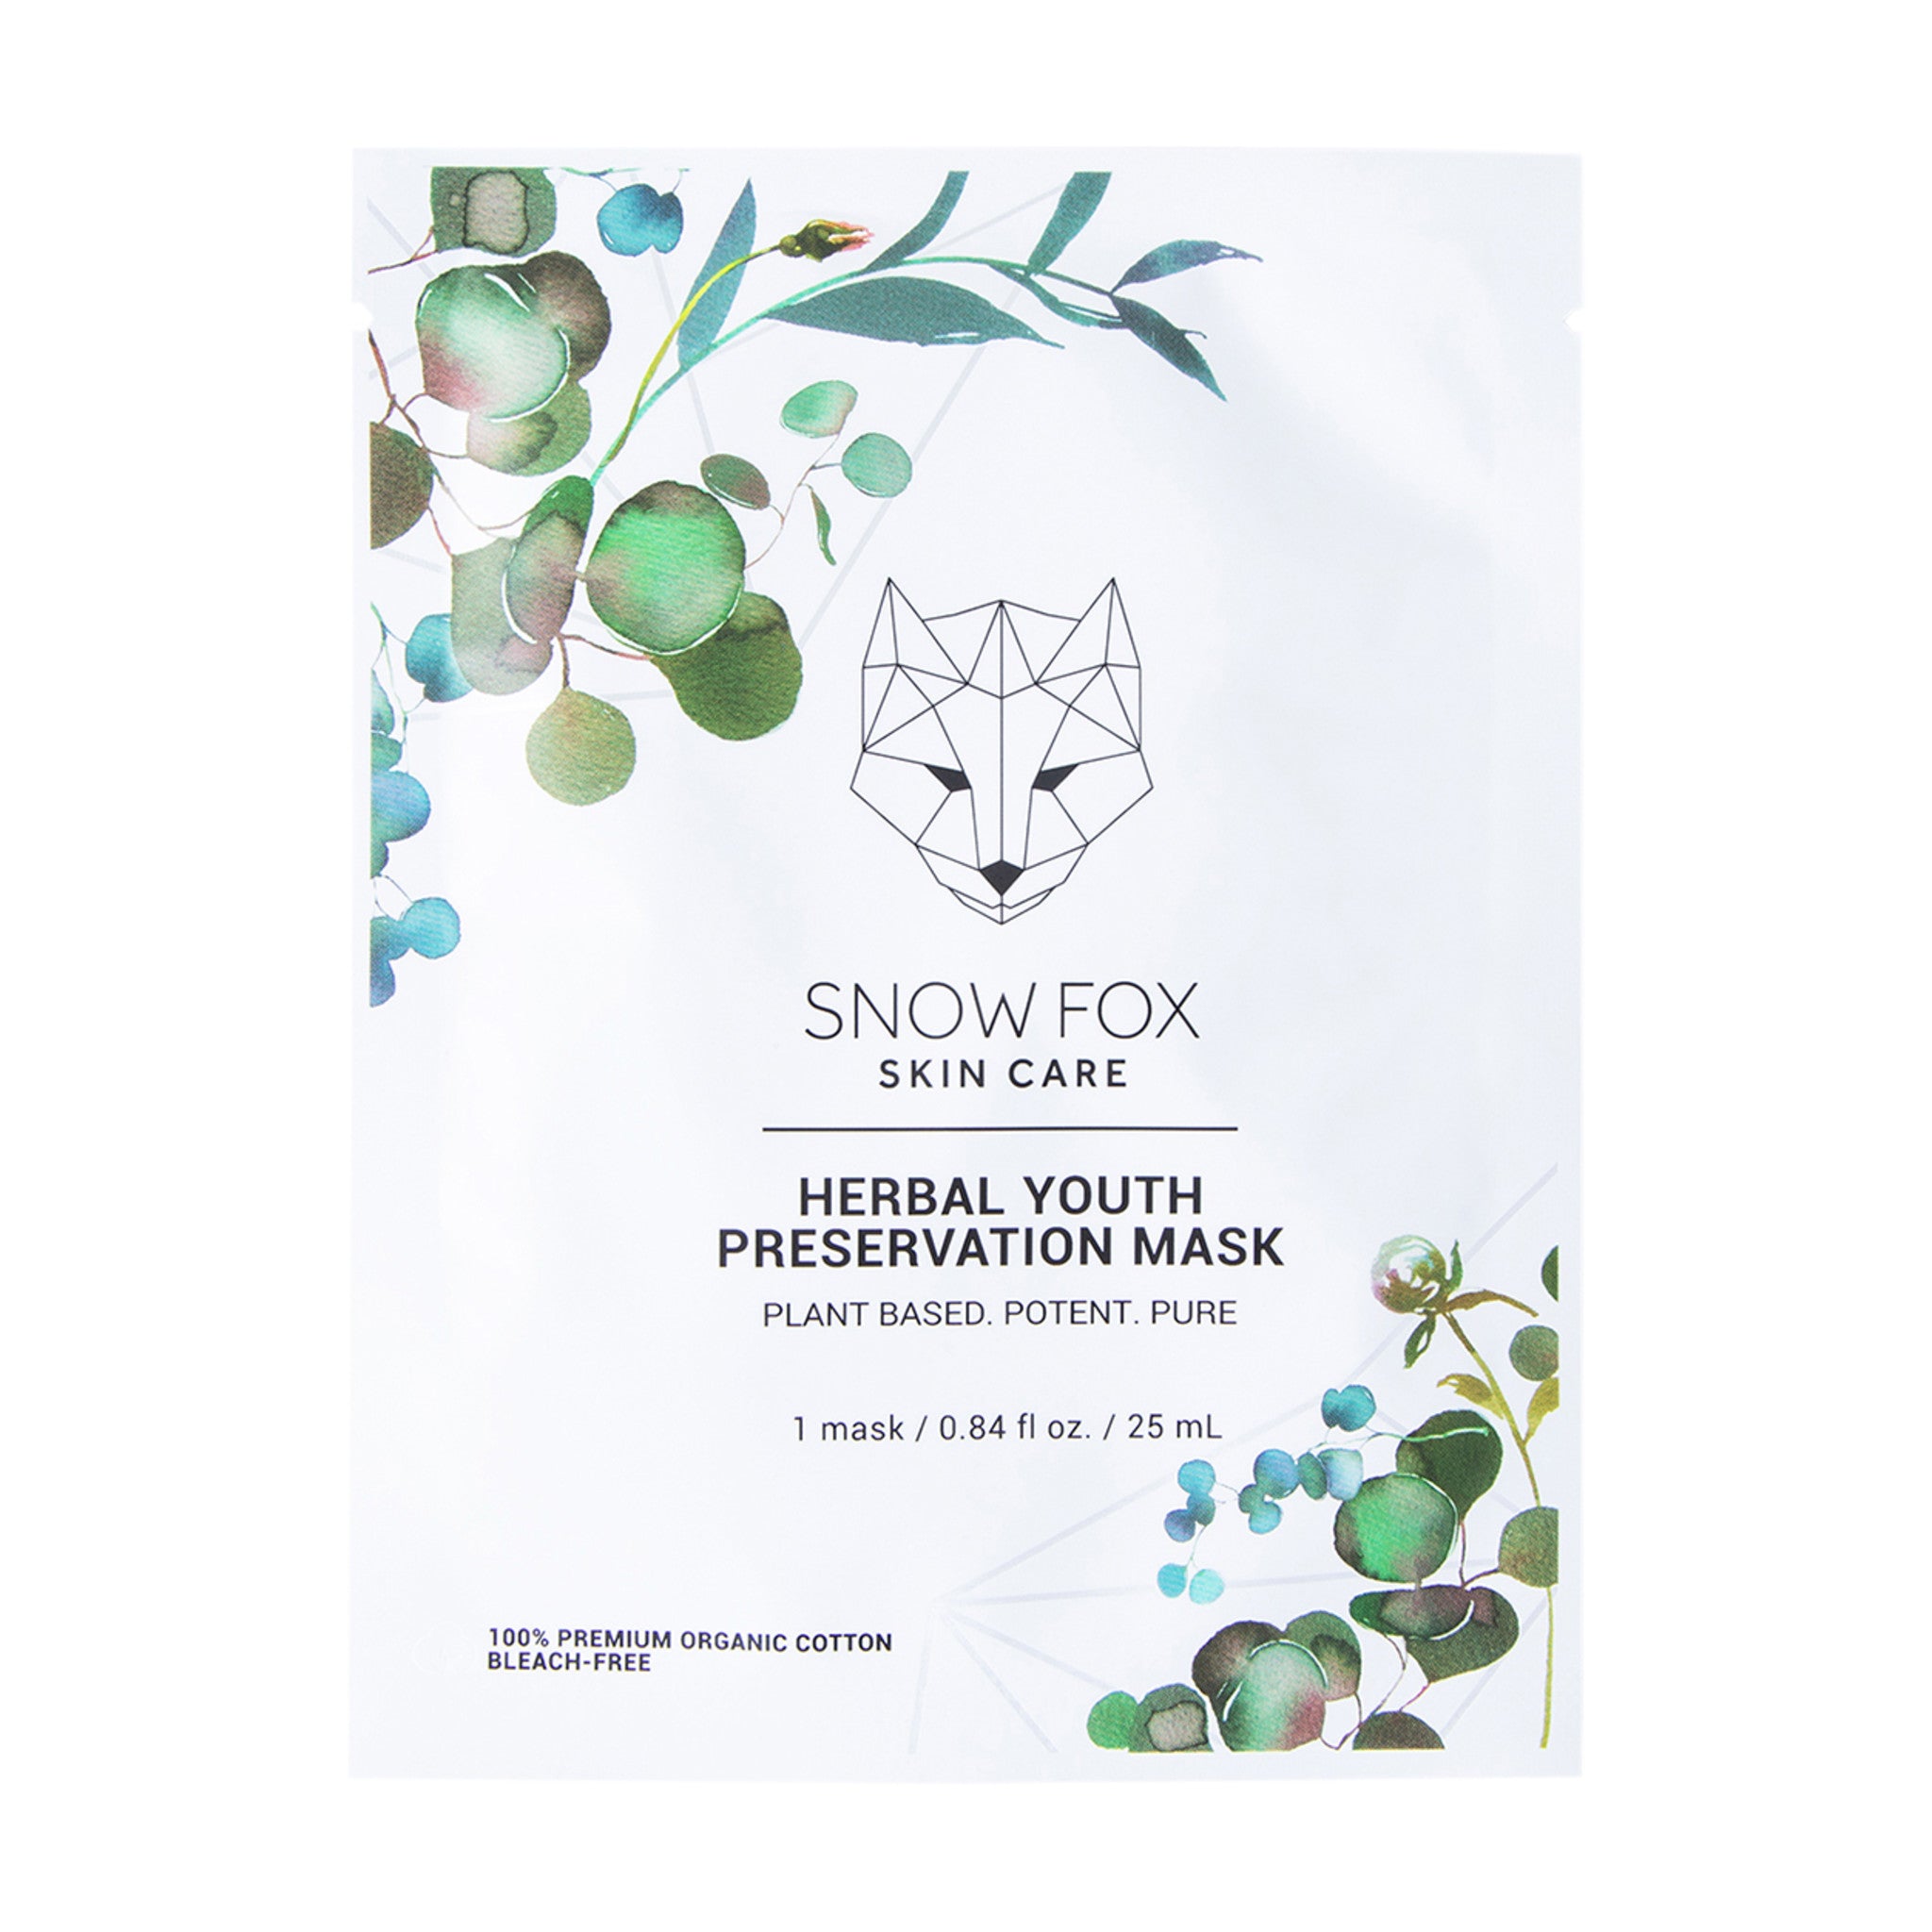 Snow Fox Skincare Herbal  Youth Preservation Mask Size variant: 1 Treatment main image.